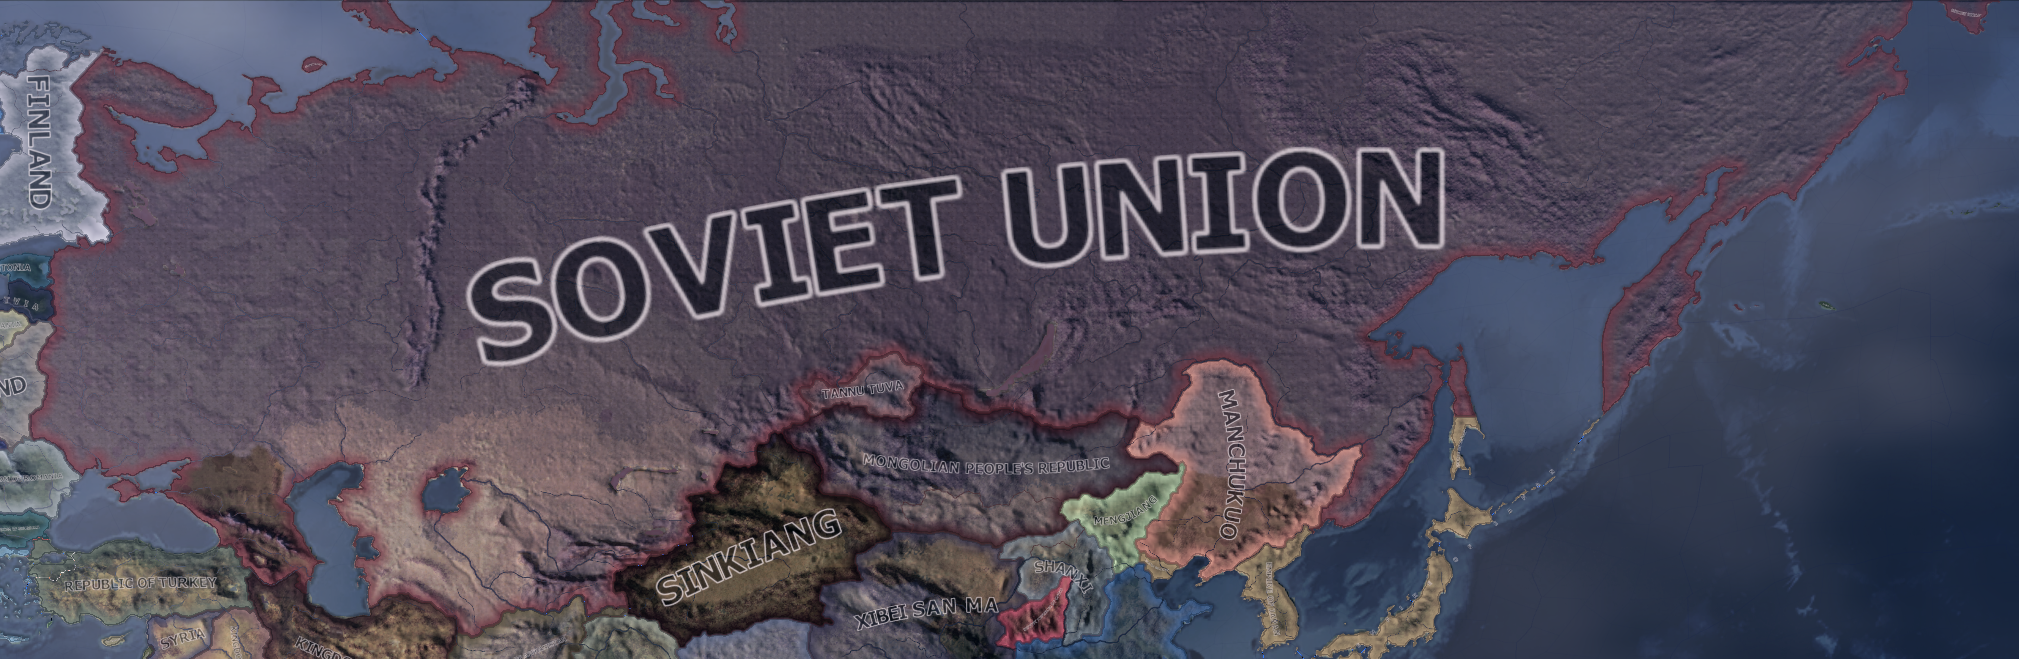 hearts of iron 4 low manpower